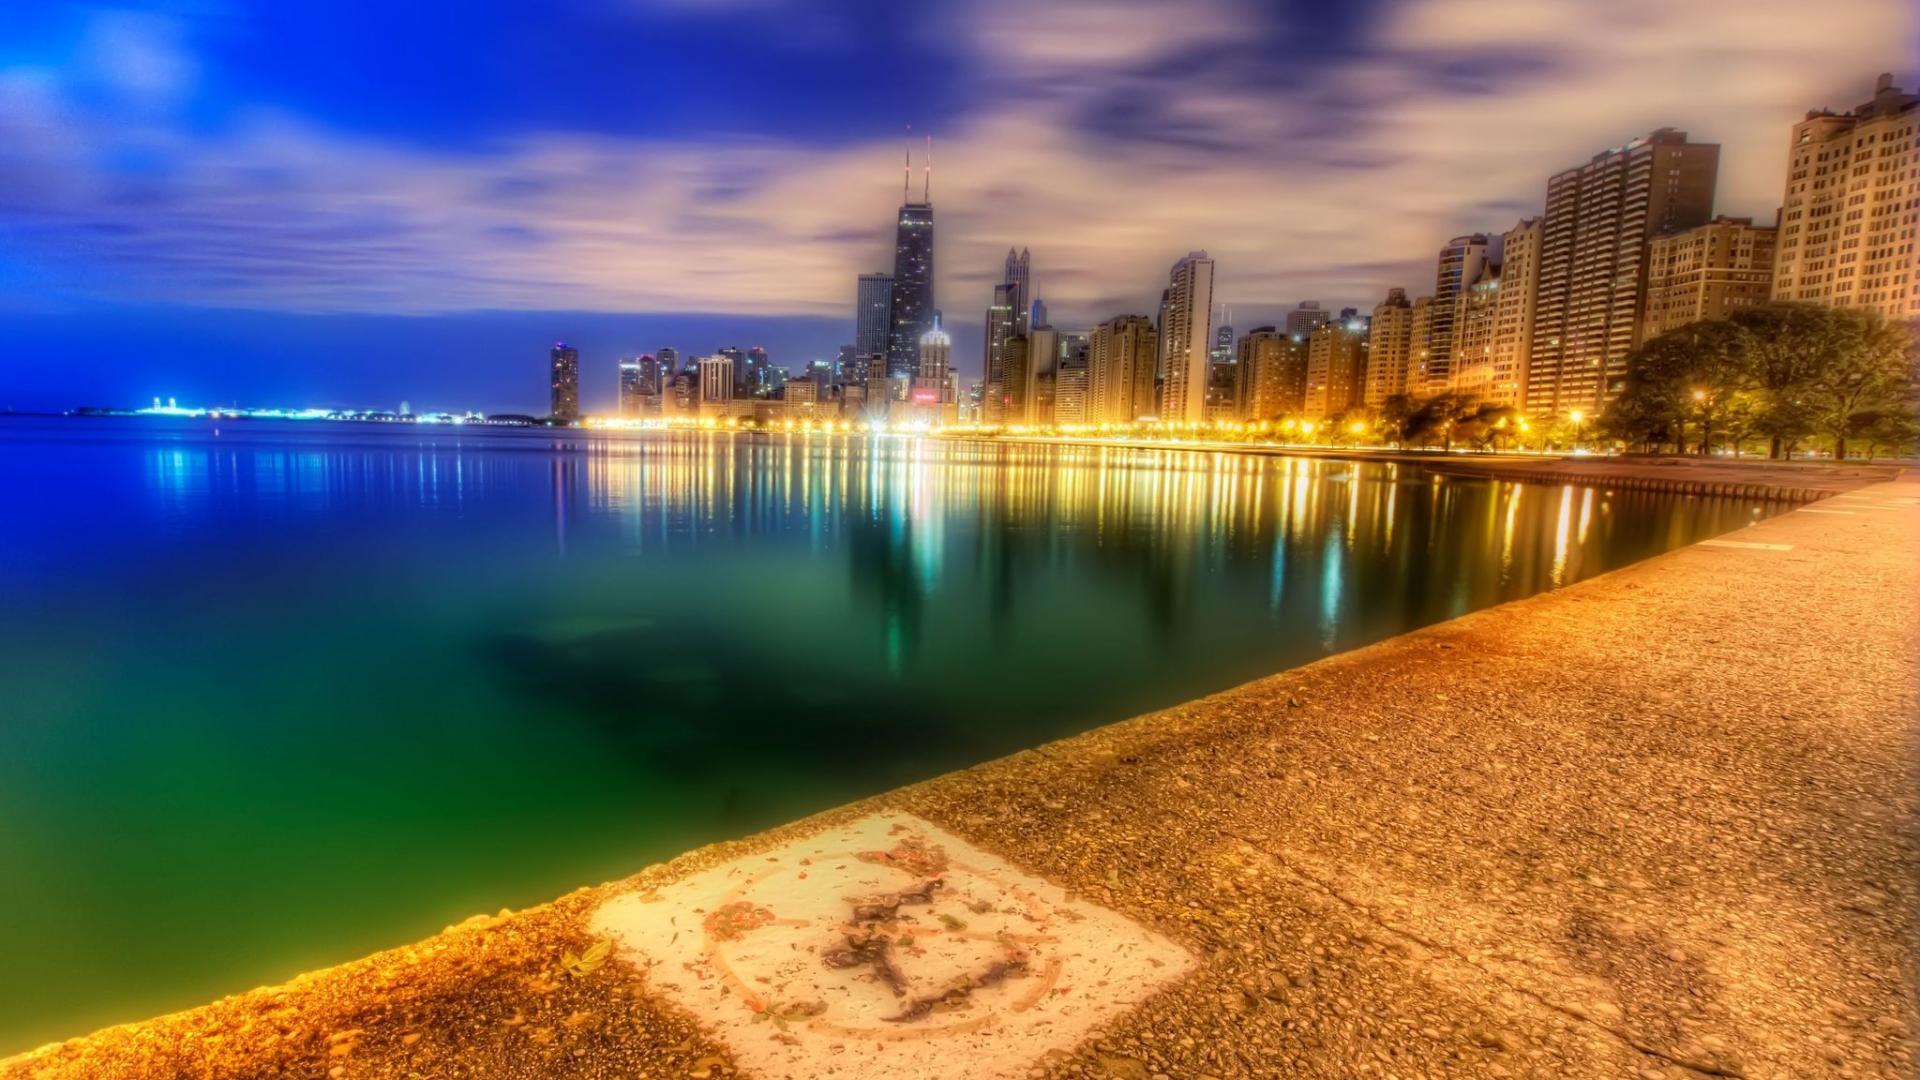 Lakefront Wallpaper Related Keywords Suggestions